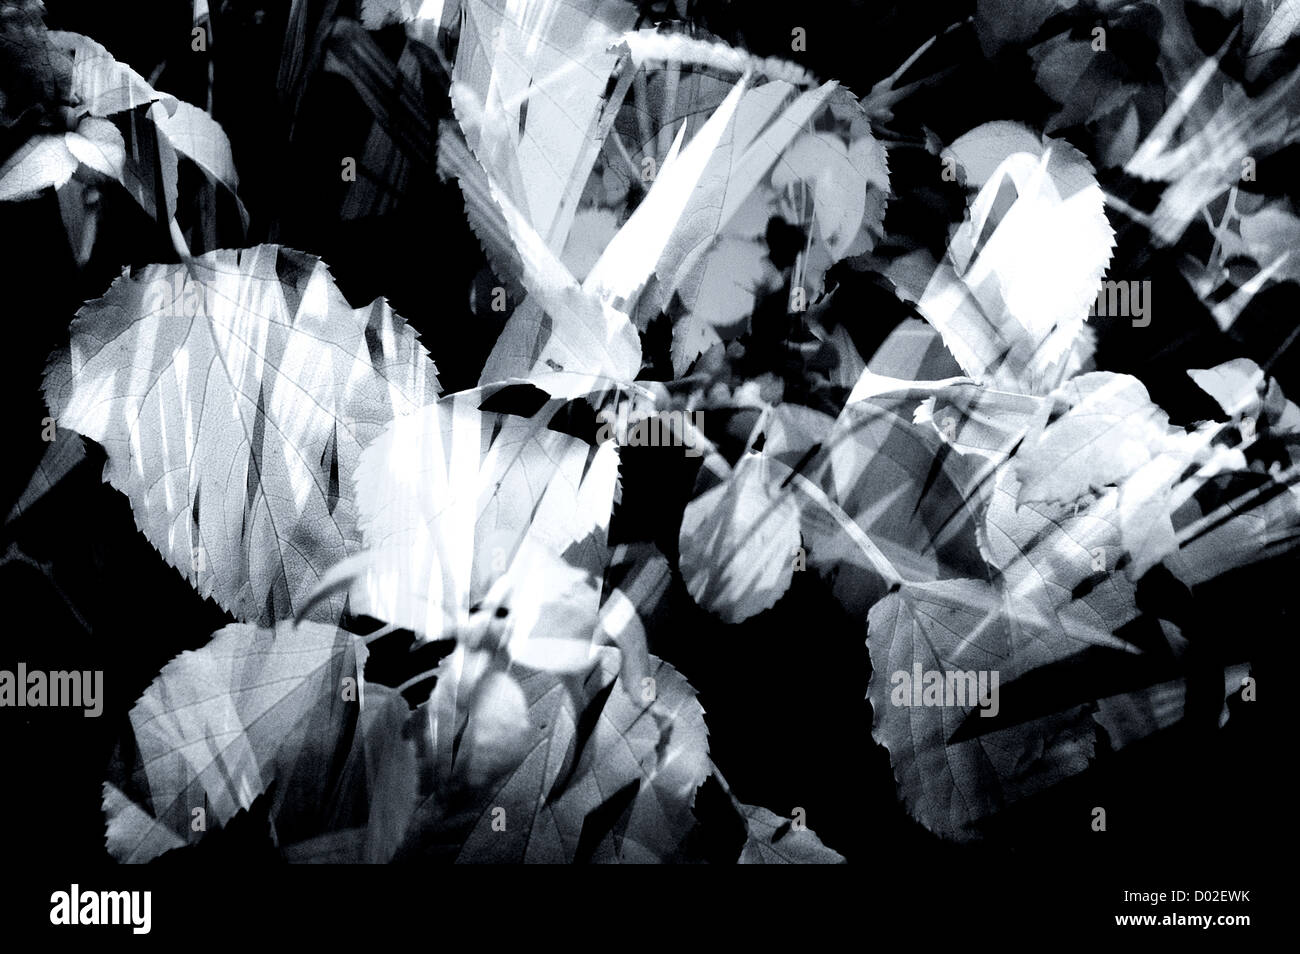 Random monochrome abstract composite blended montage image of leaves Stock Photo